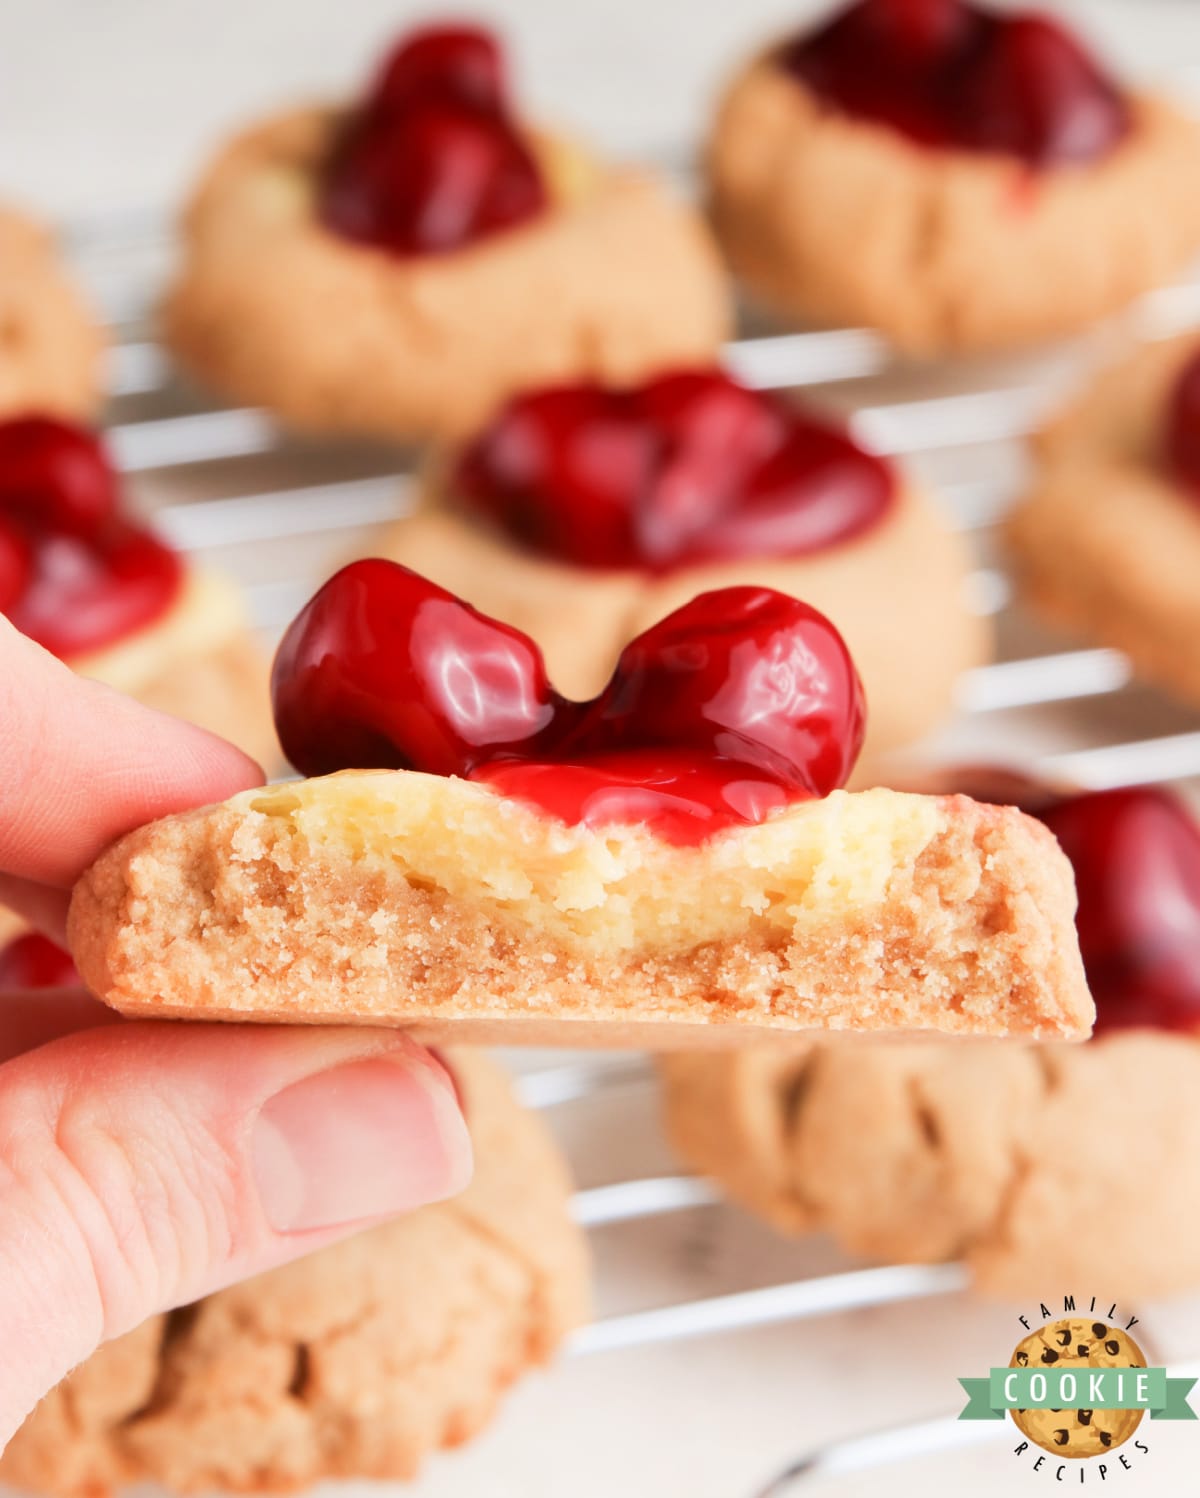 Graham cracker cookie with cheesecake filling and cherries on top